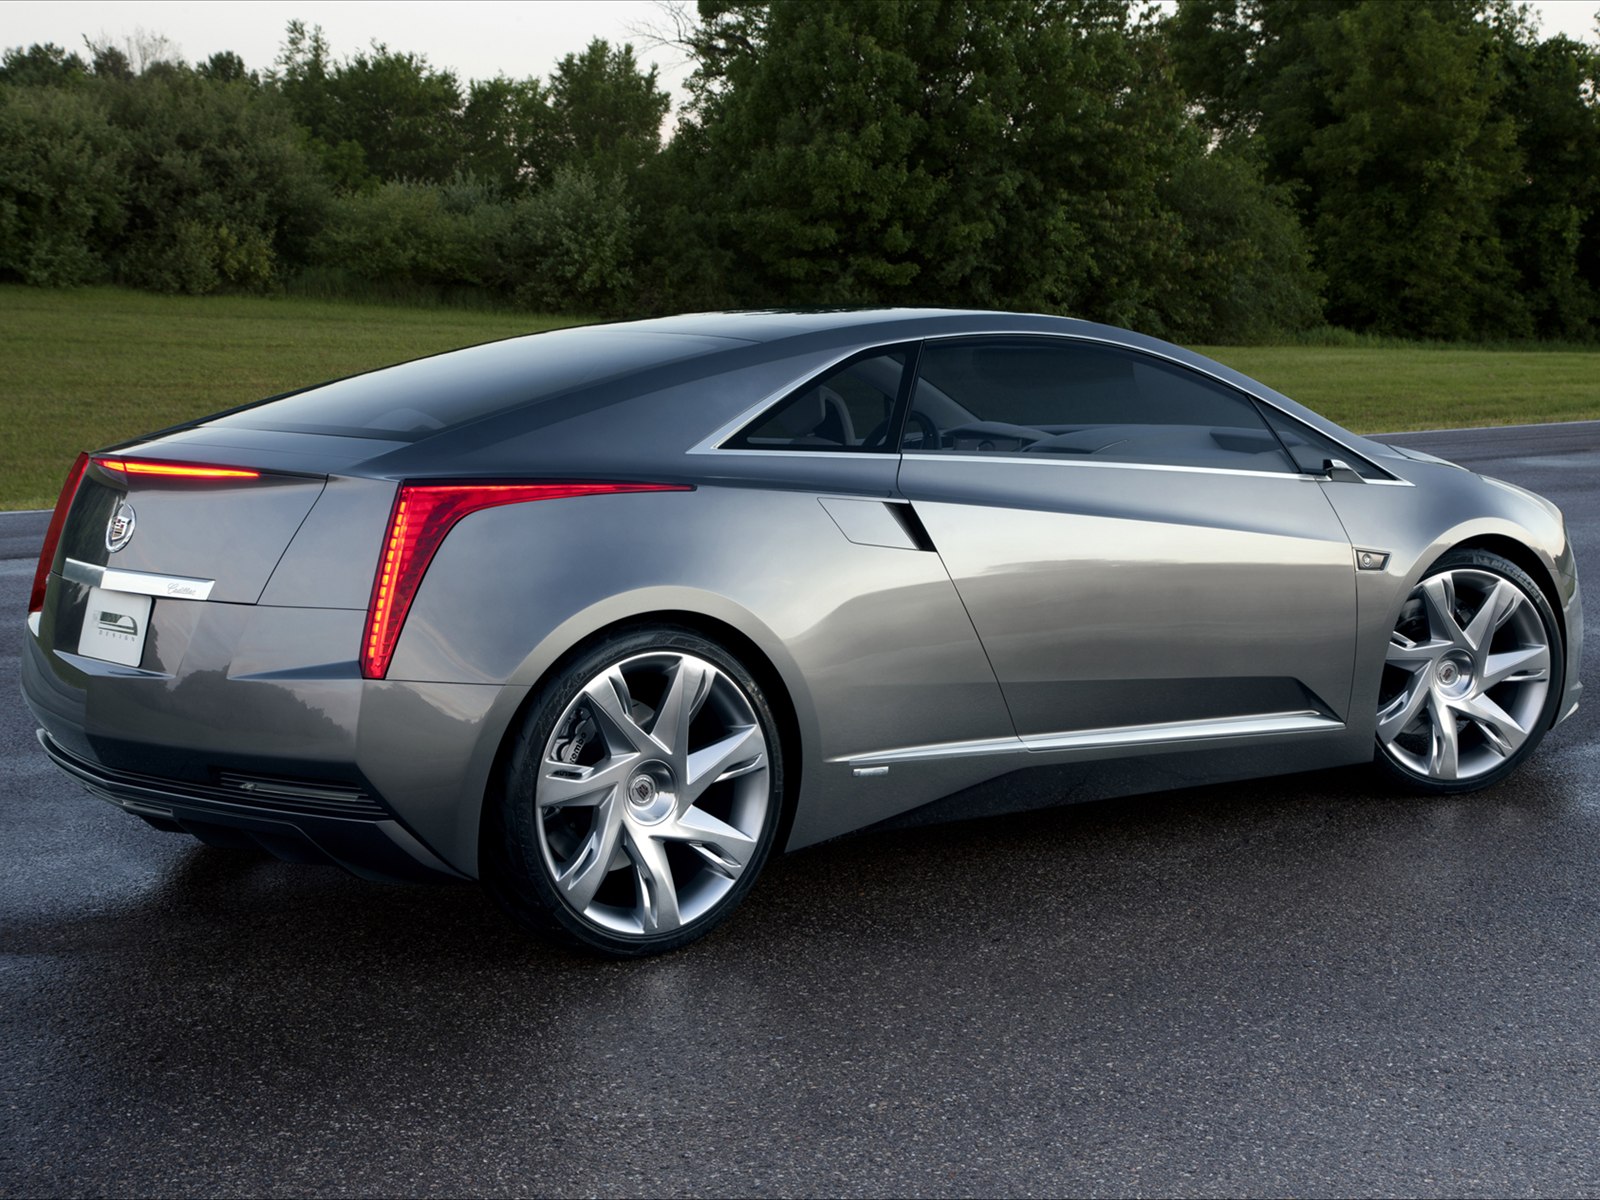 cadillac-elr-2012-electric-car-pictures-06.jpg (1600×1200)